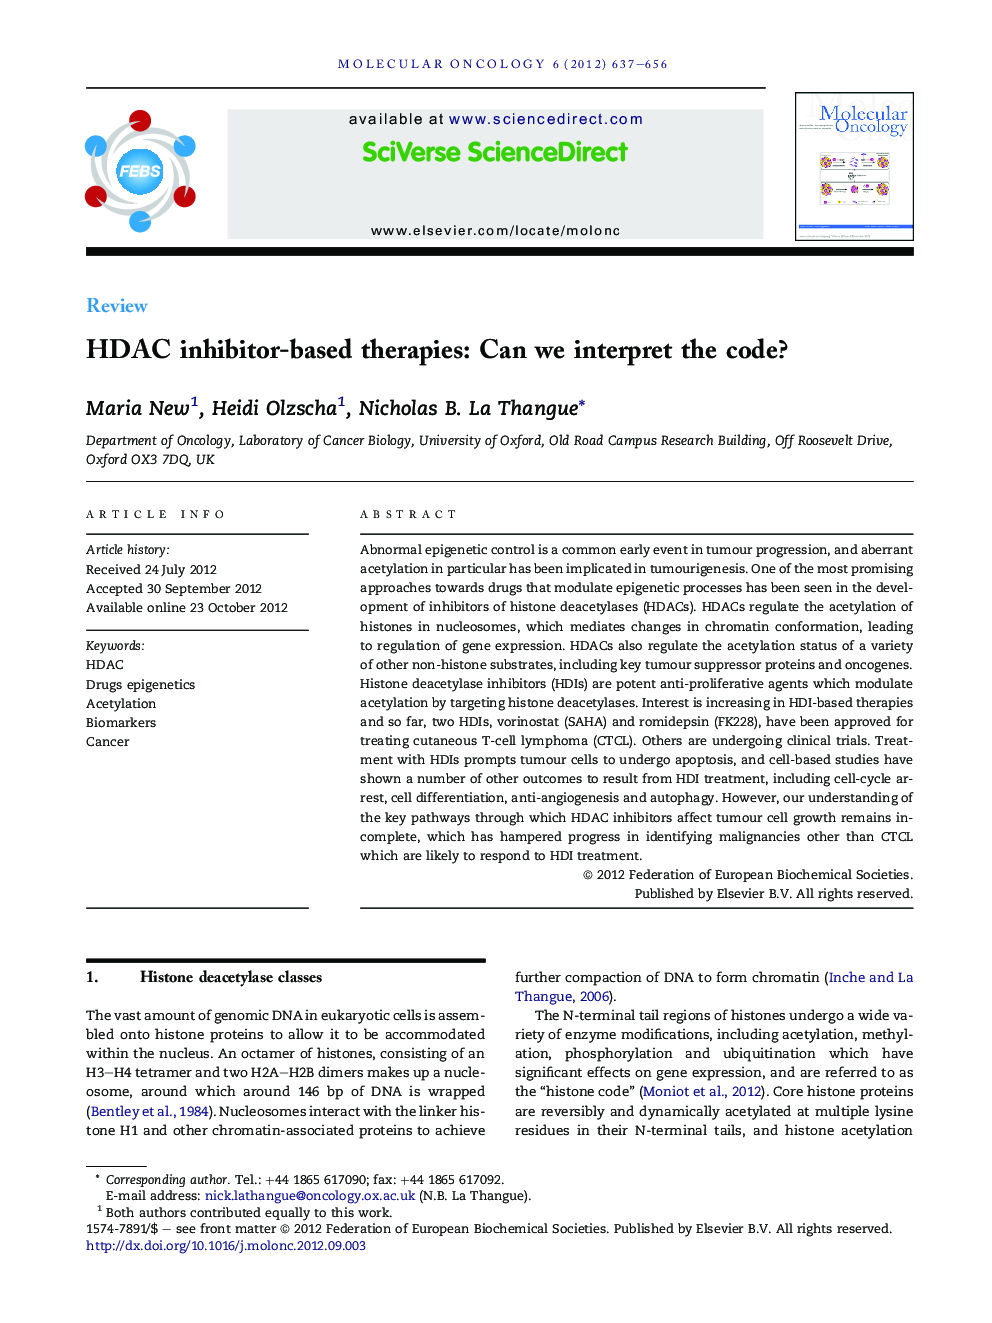 HDAC inhibitor-based therapies: Can we interpret the code?